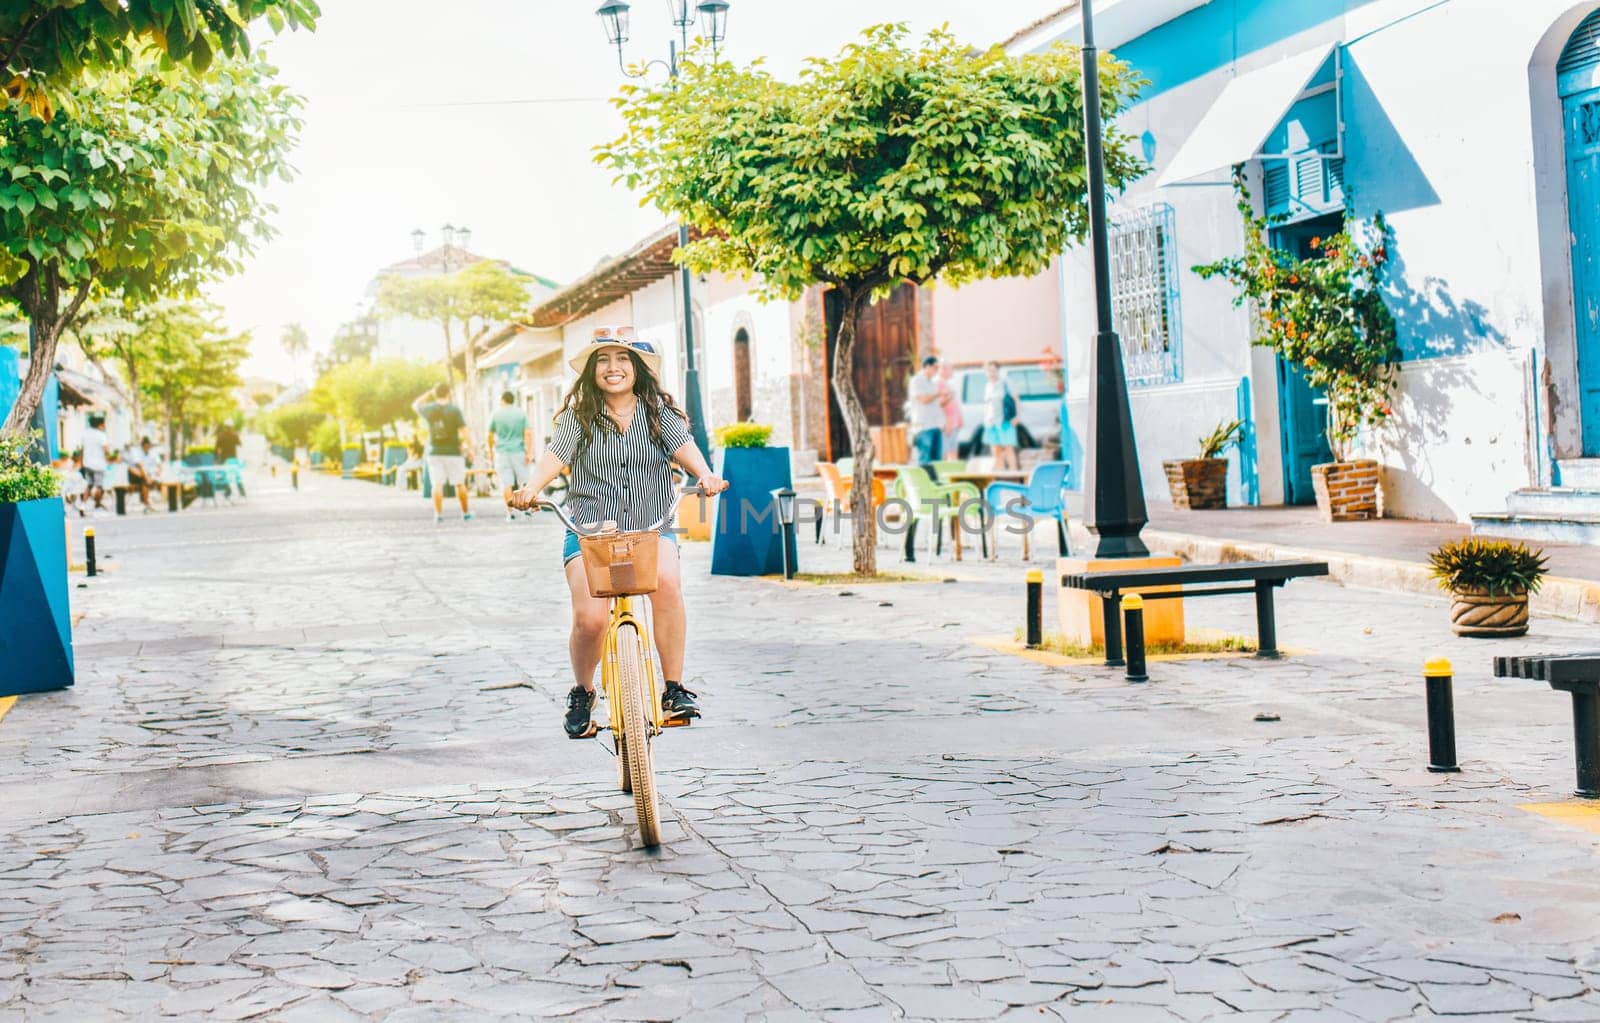 Young tourist woman riding a bicycle on the streets of Granada, Nicaragua. Happy tourist girl riding a bicycle on Calzada street